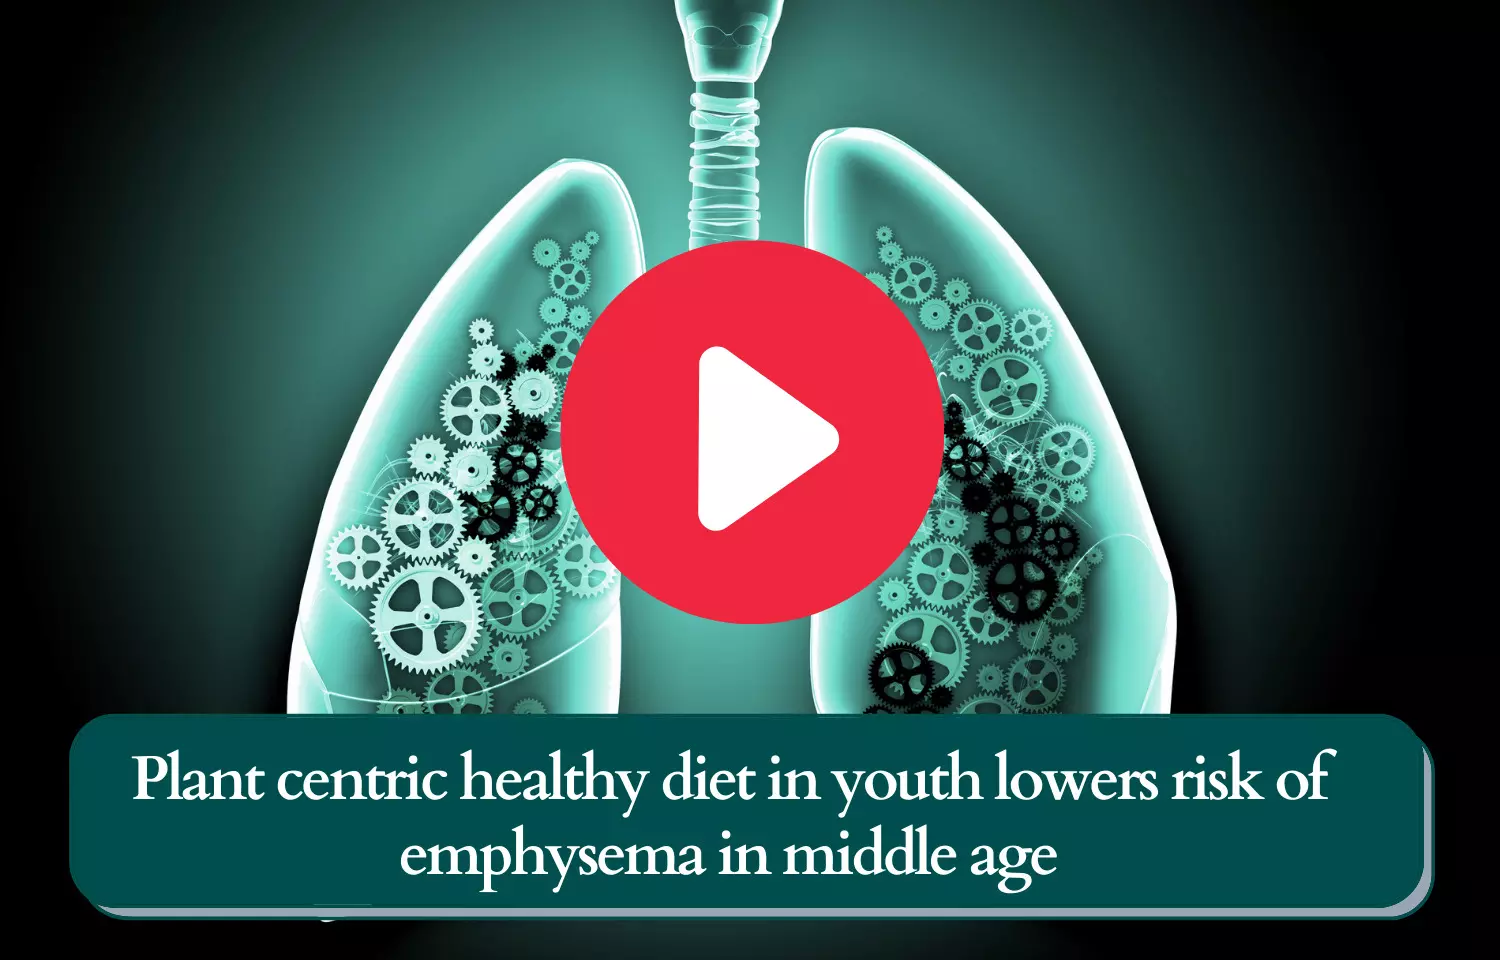 Plant centric healthy diet in youth lowers risk of emphysema in middle age